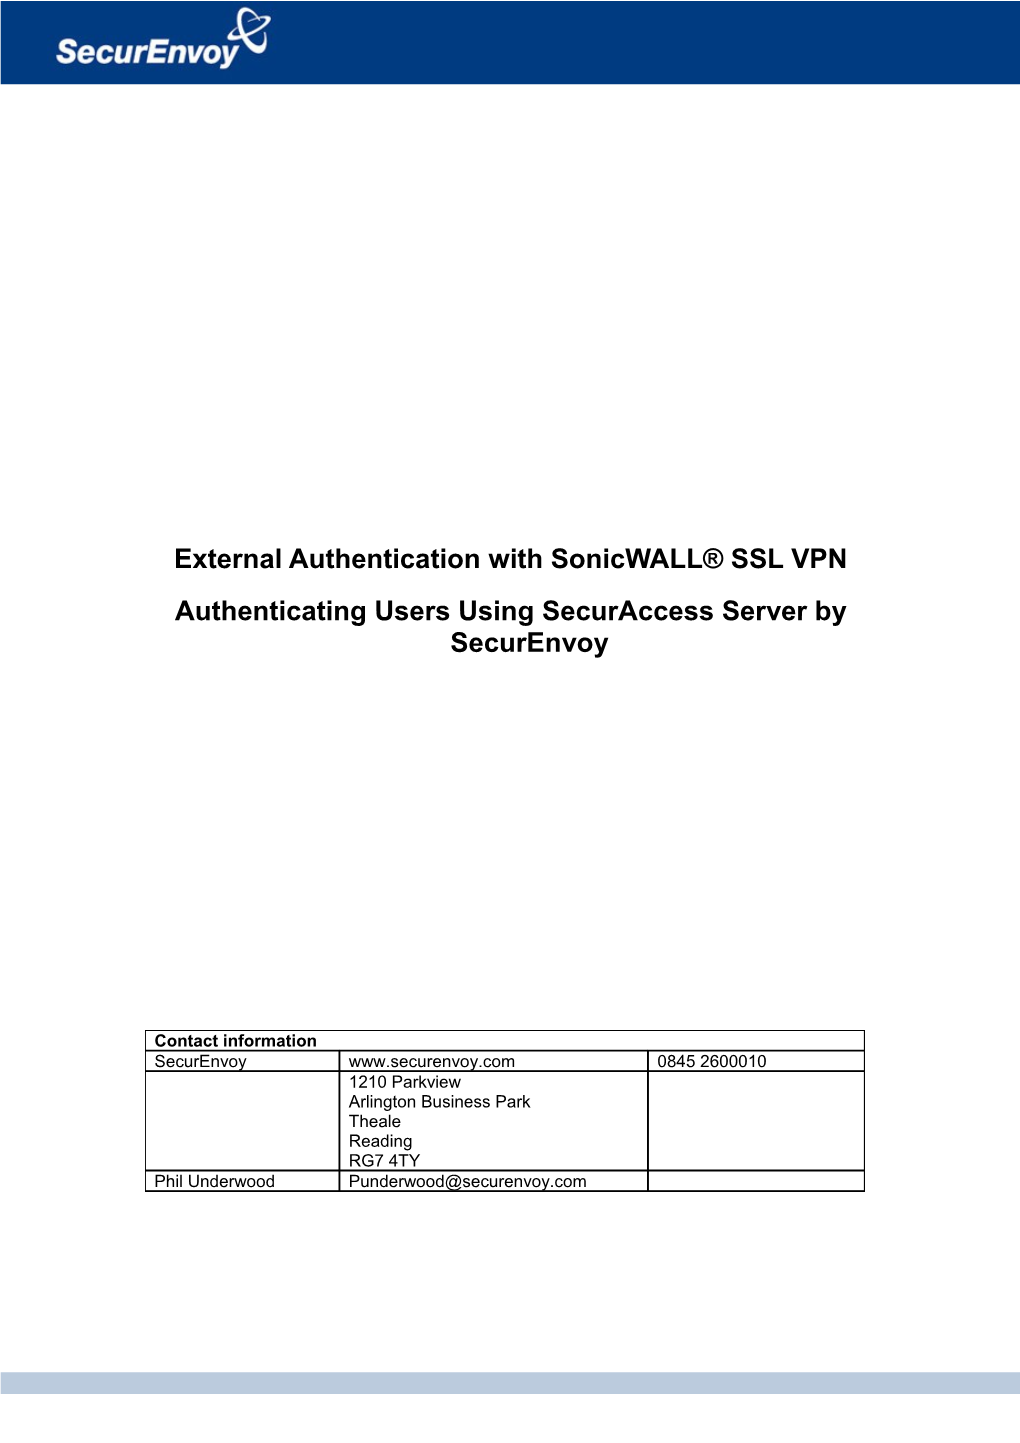 External Authentication with Sonicwall SSL VPN